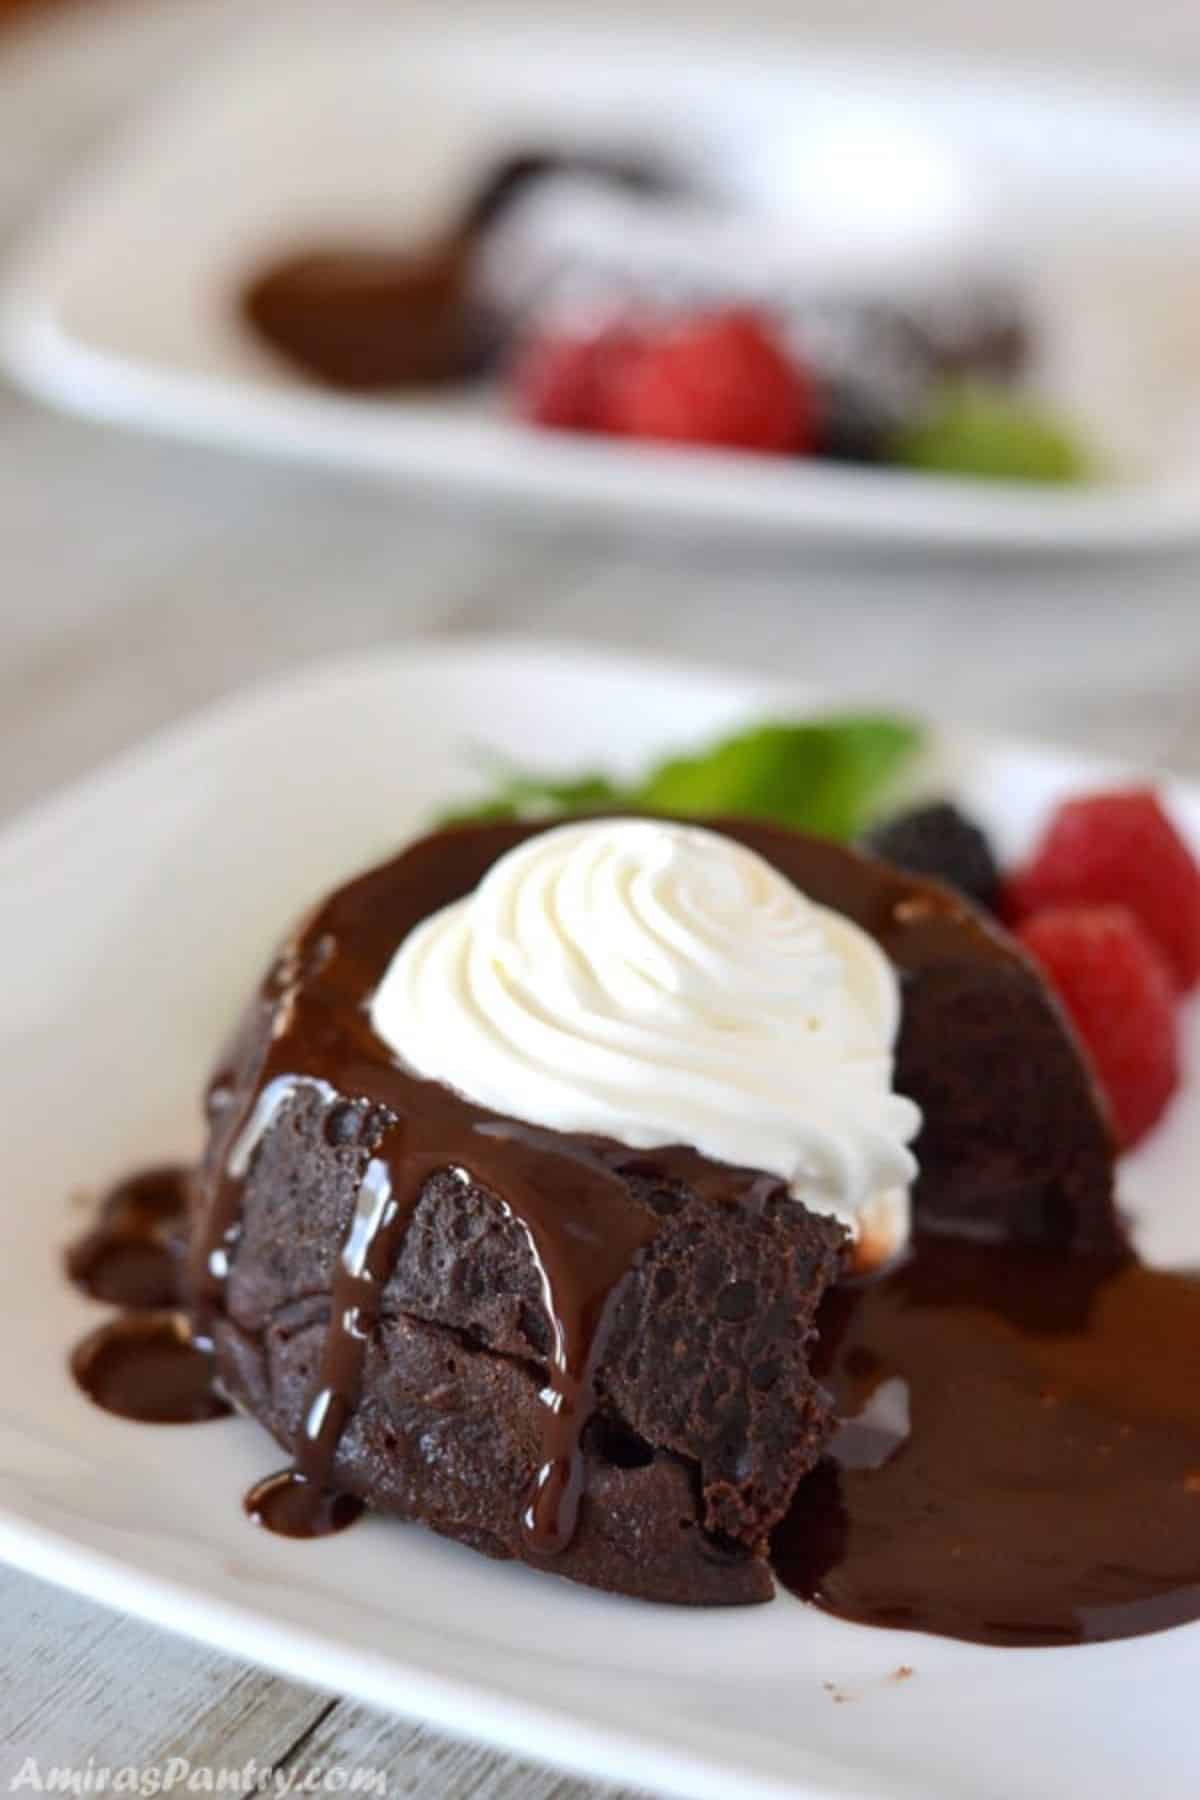 A close up of a piece of chocolate cake on a plate, with Cream on top.